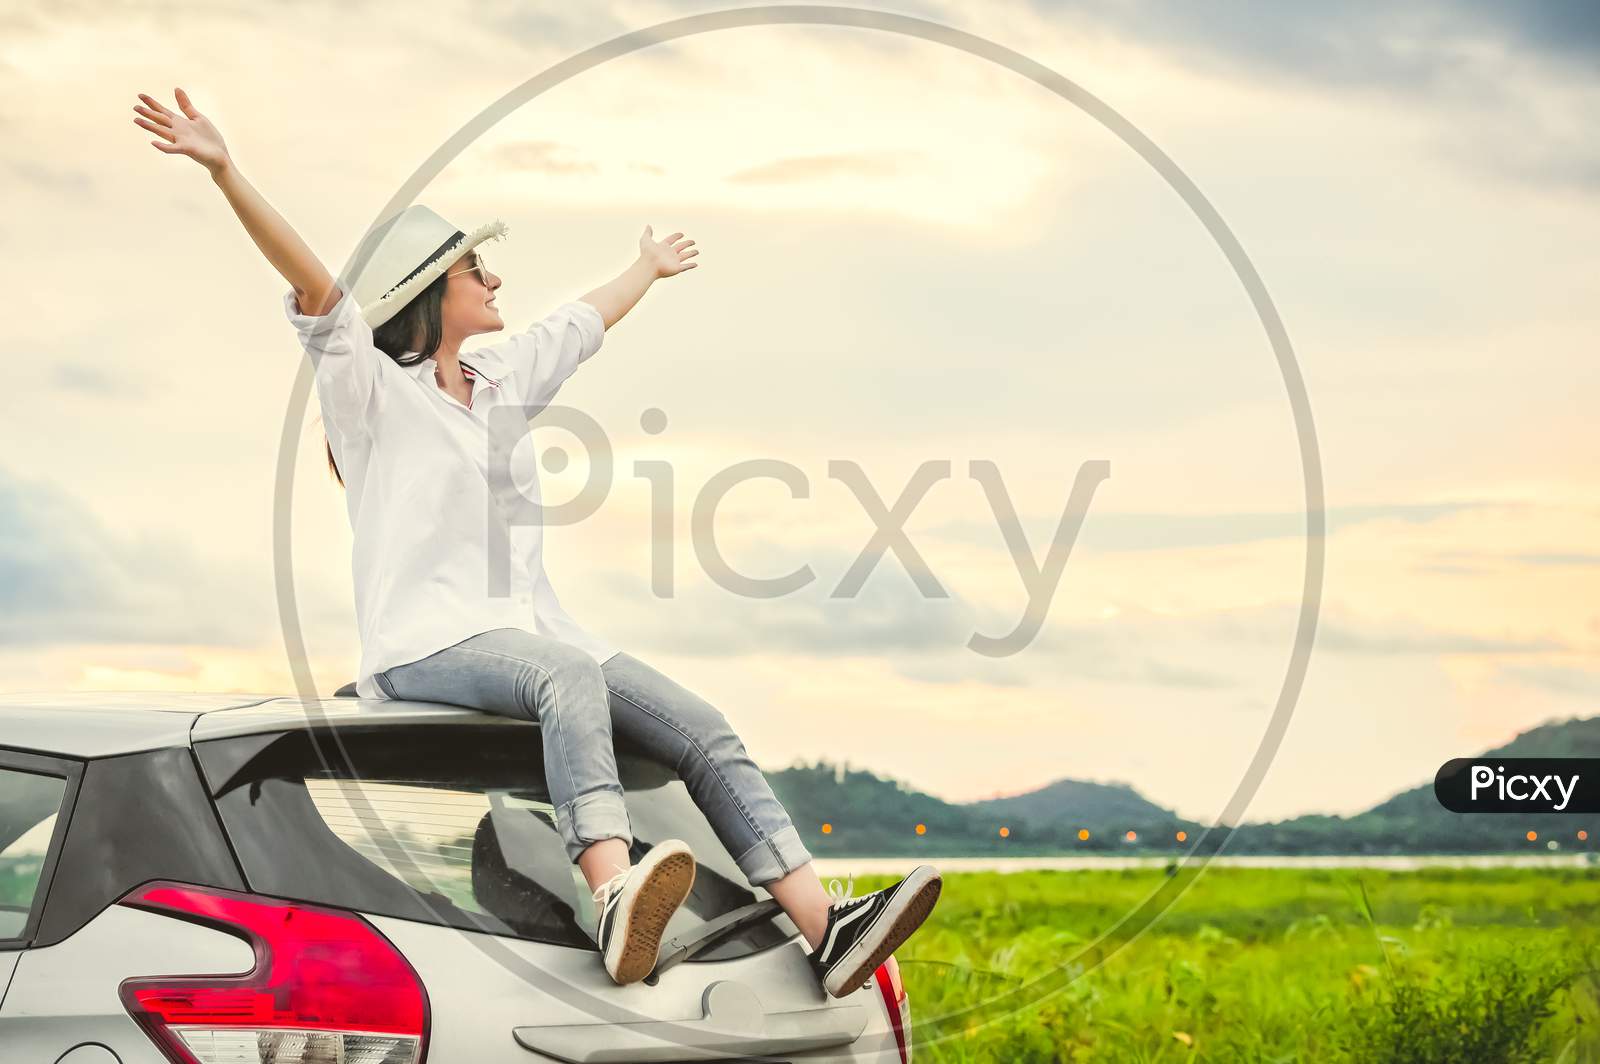 Happy Asian Woman Spread Arms Widely And Breathed Fresh Air With Happiness Mood In Evening After Sunset On Car Roof. People Lifestyle In Long Vacation Trip Concept. Outdoors Nature And Transportation